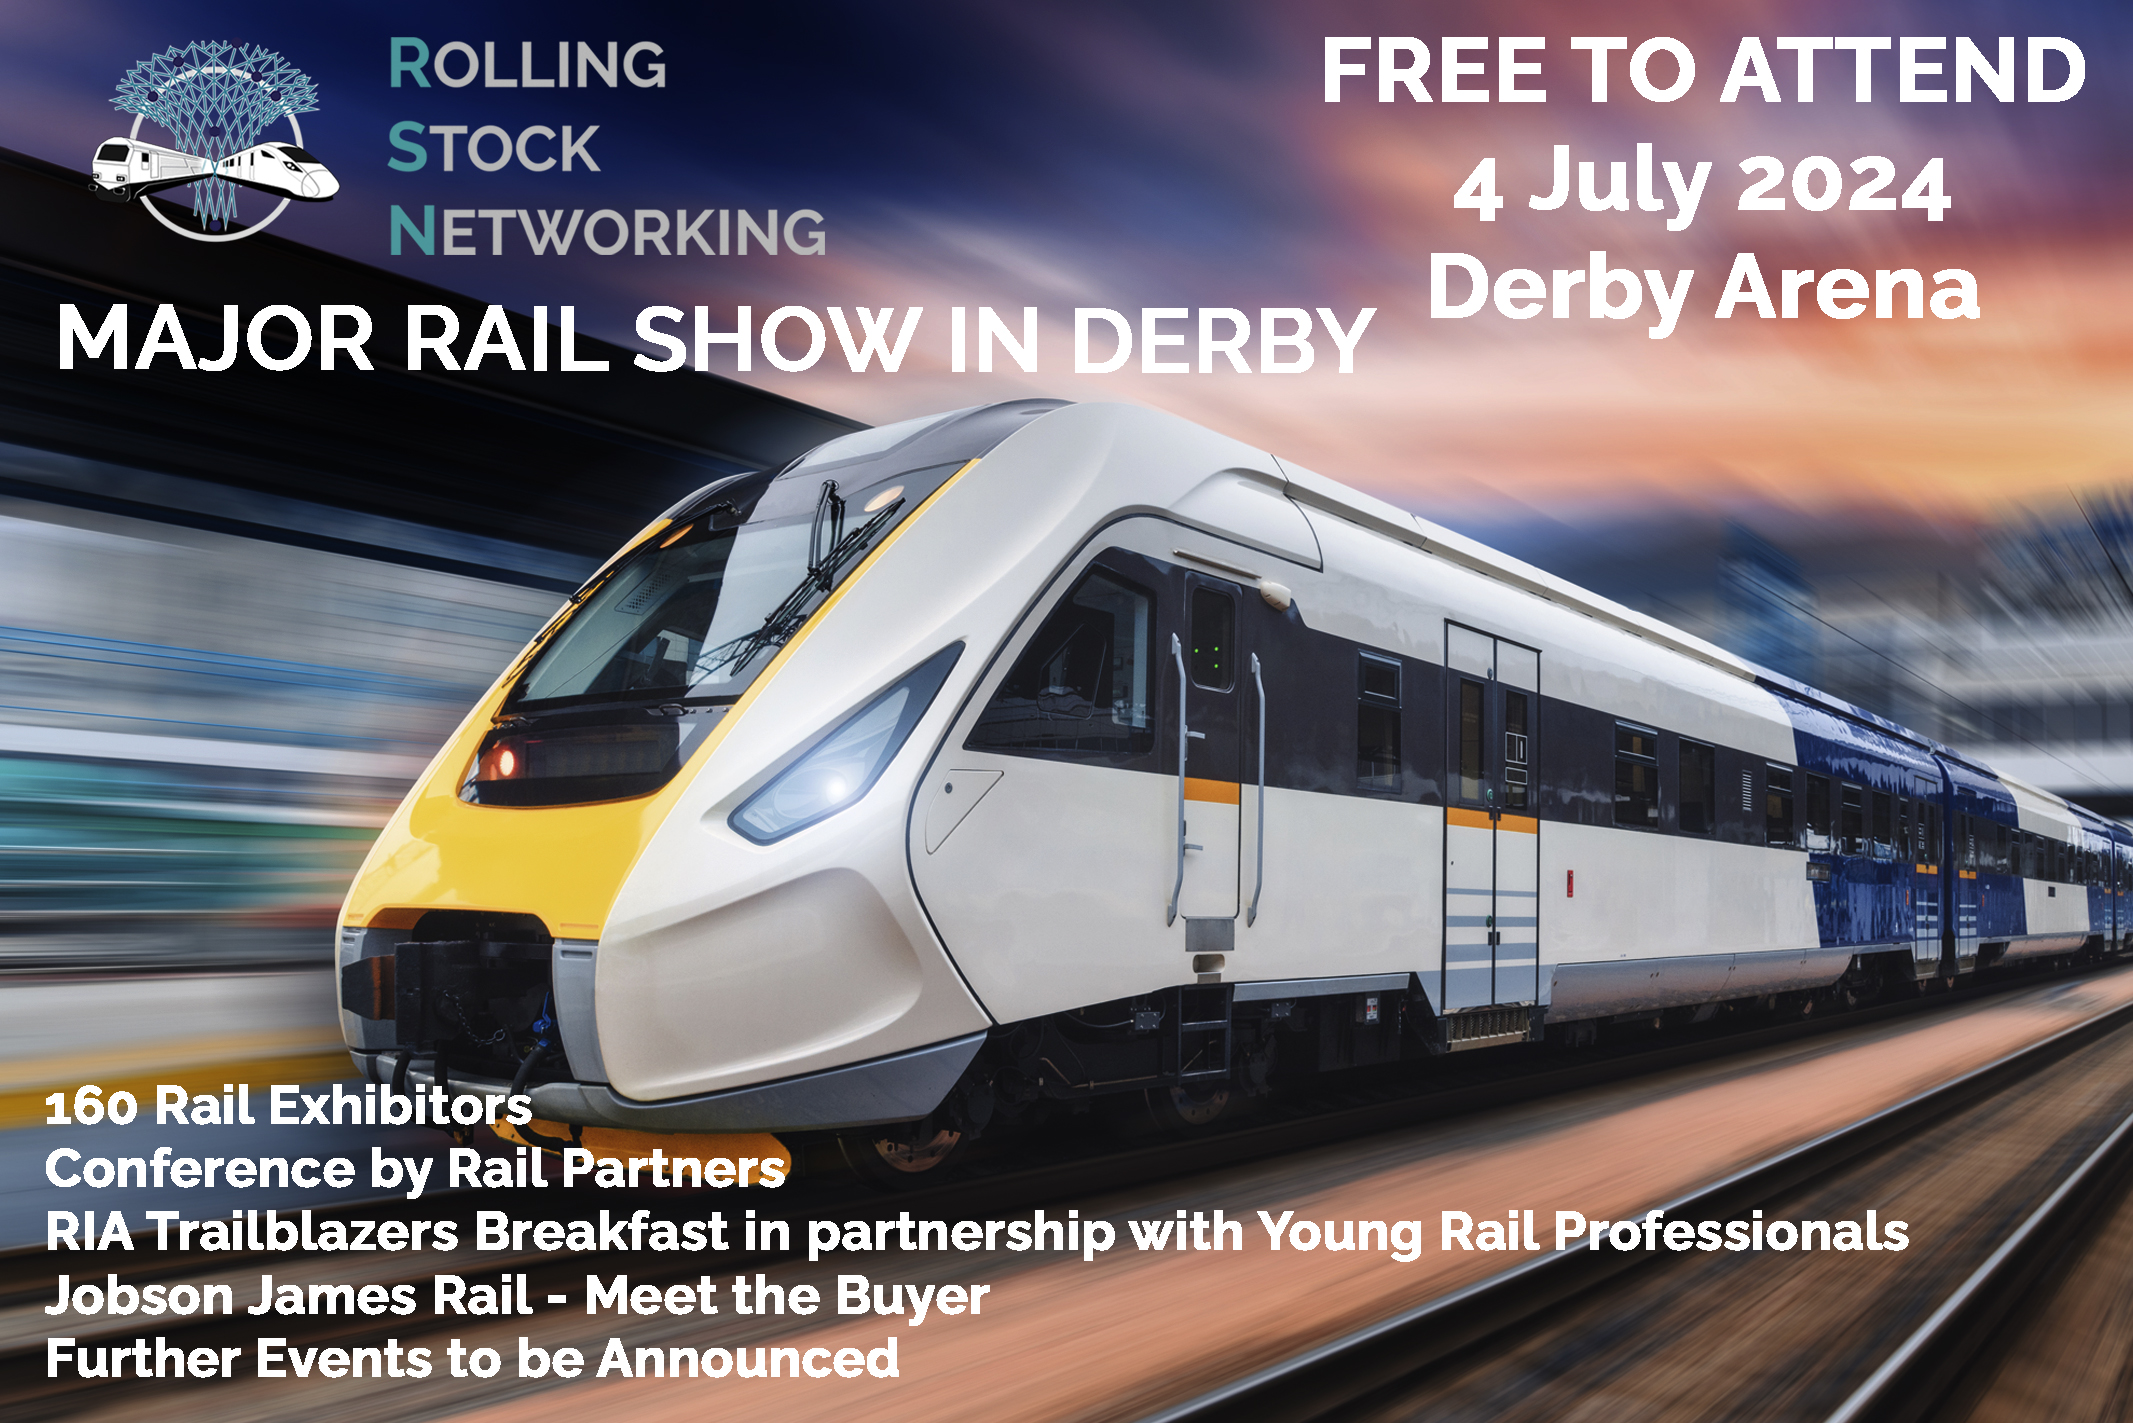 Rolling Stock Networking